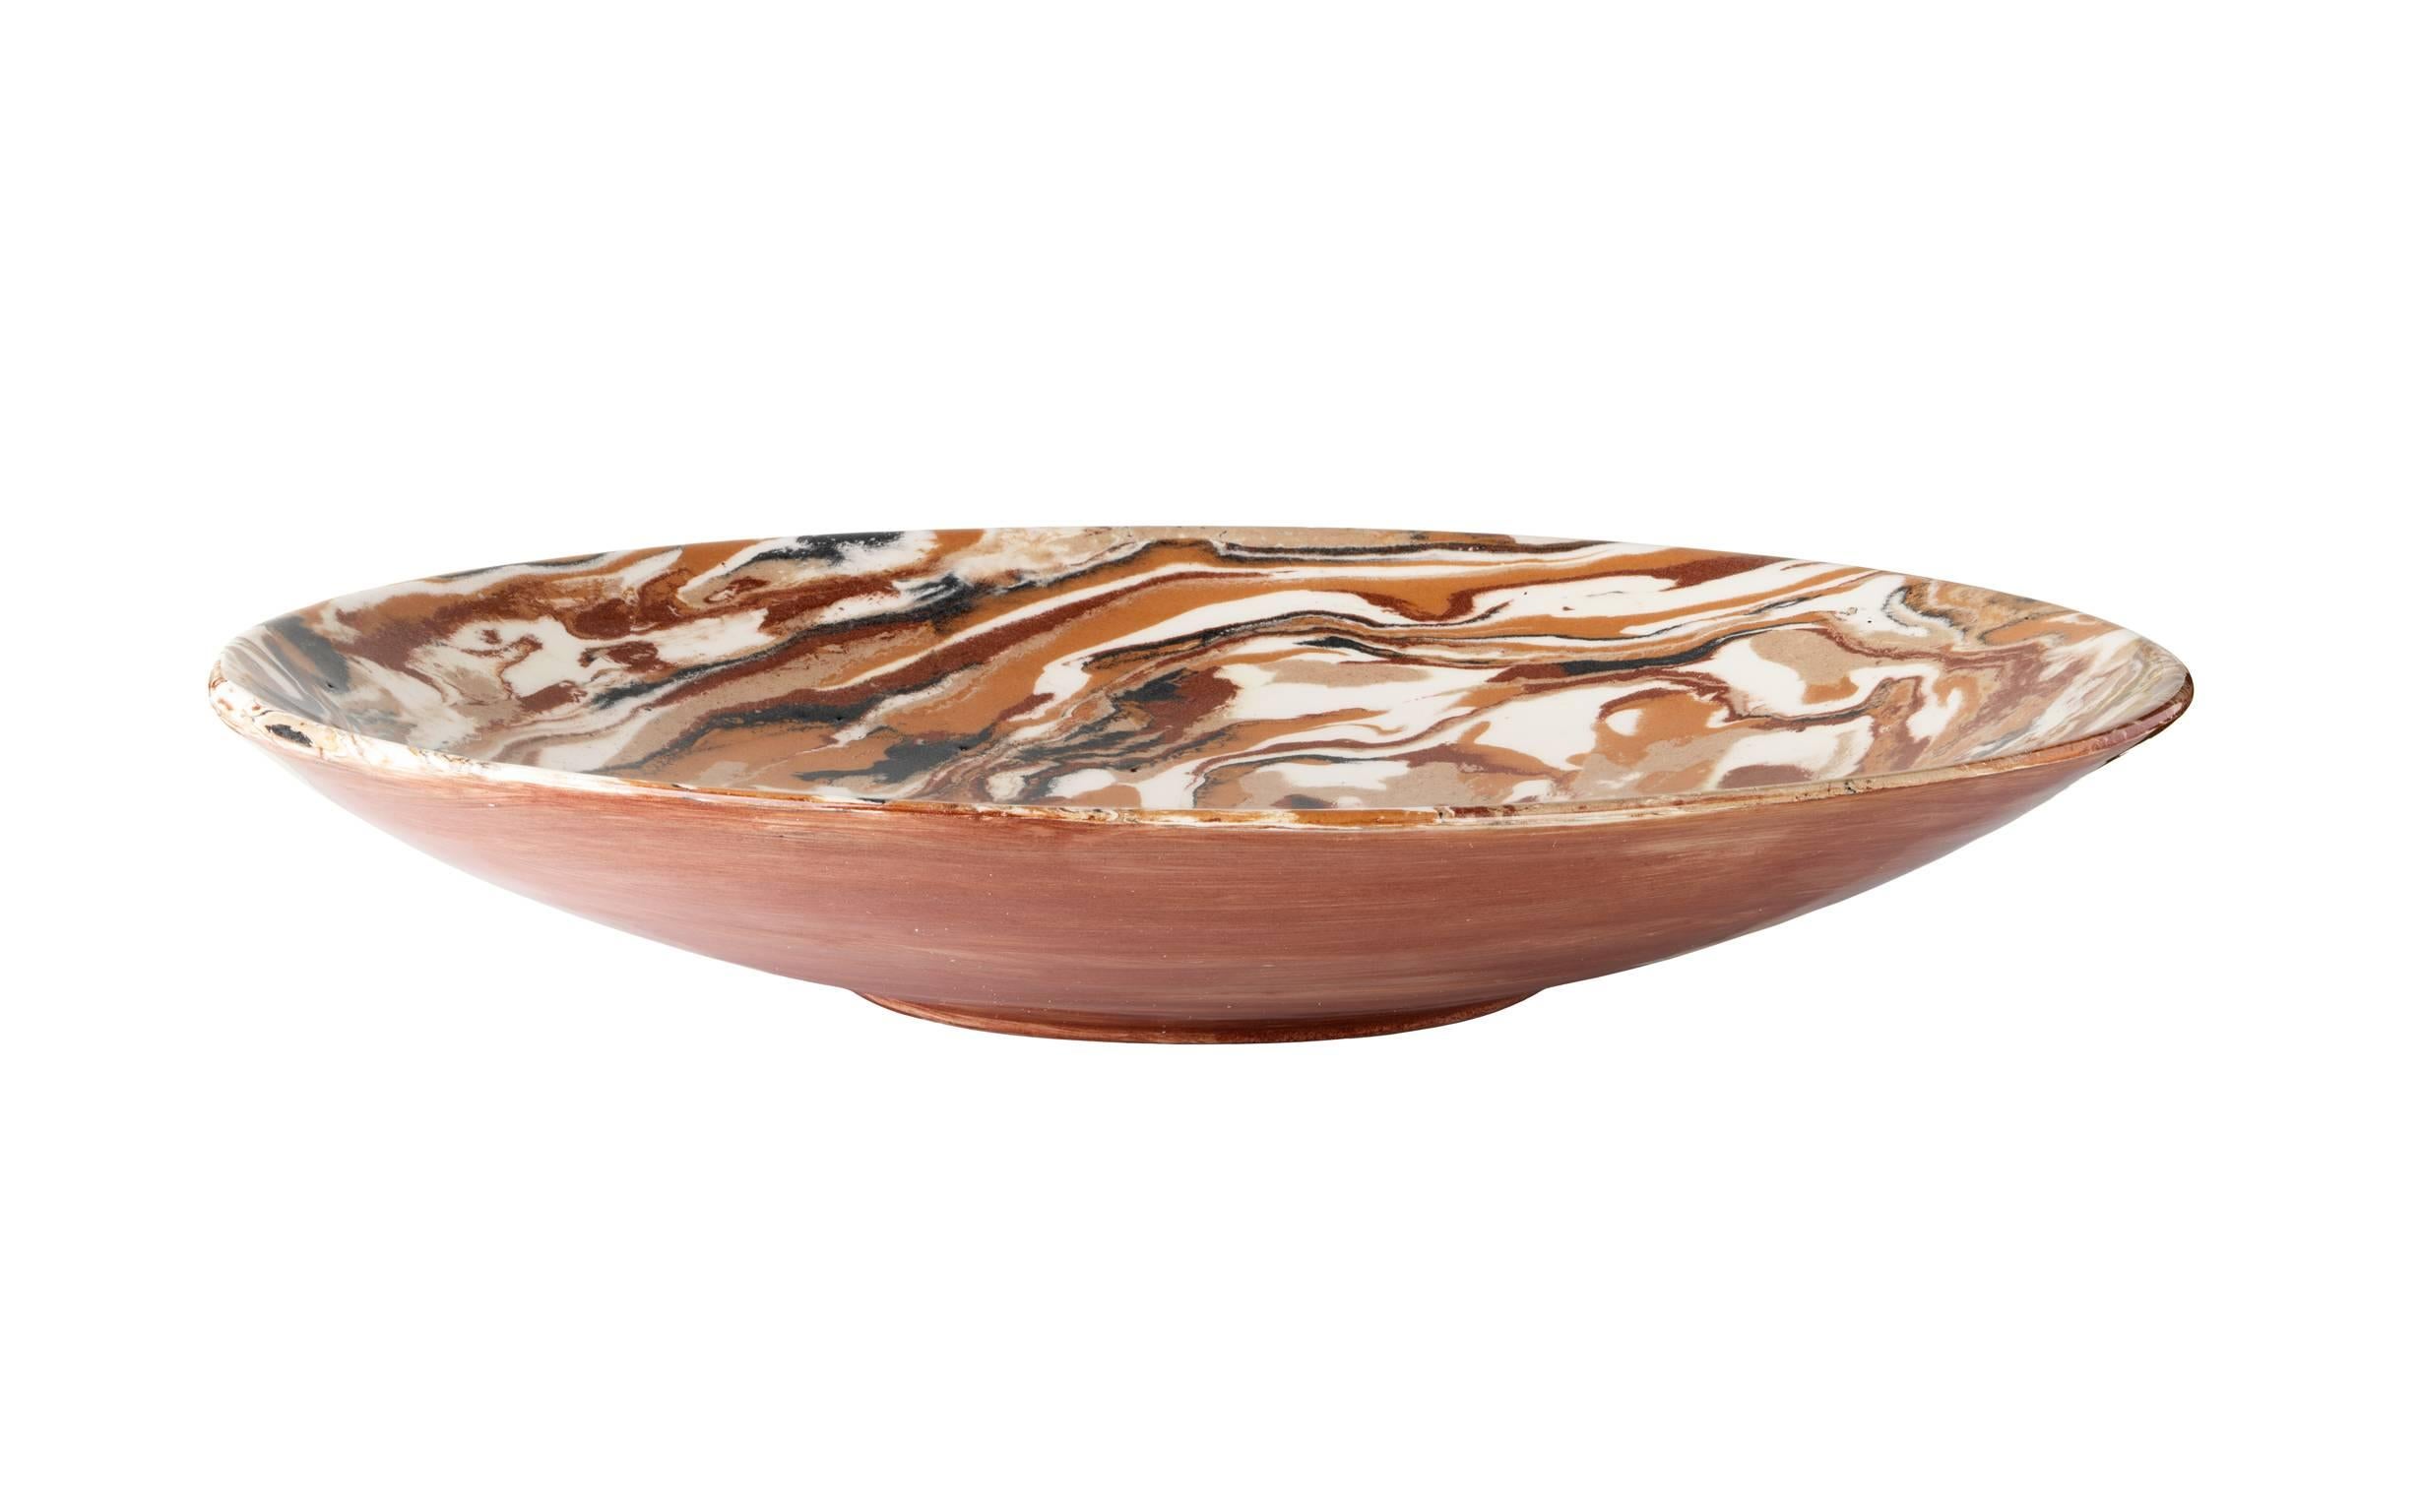 One of a kind cabana brown marbleized ceramic platter.

Our signature collection of marbleized ceramic tableware crafted by Italian artisans. Their unique marbled effect is not painted, but the result of a stunning blend of natural clays. 

Each